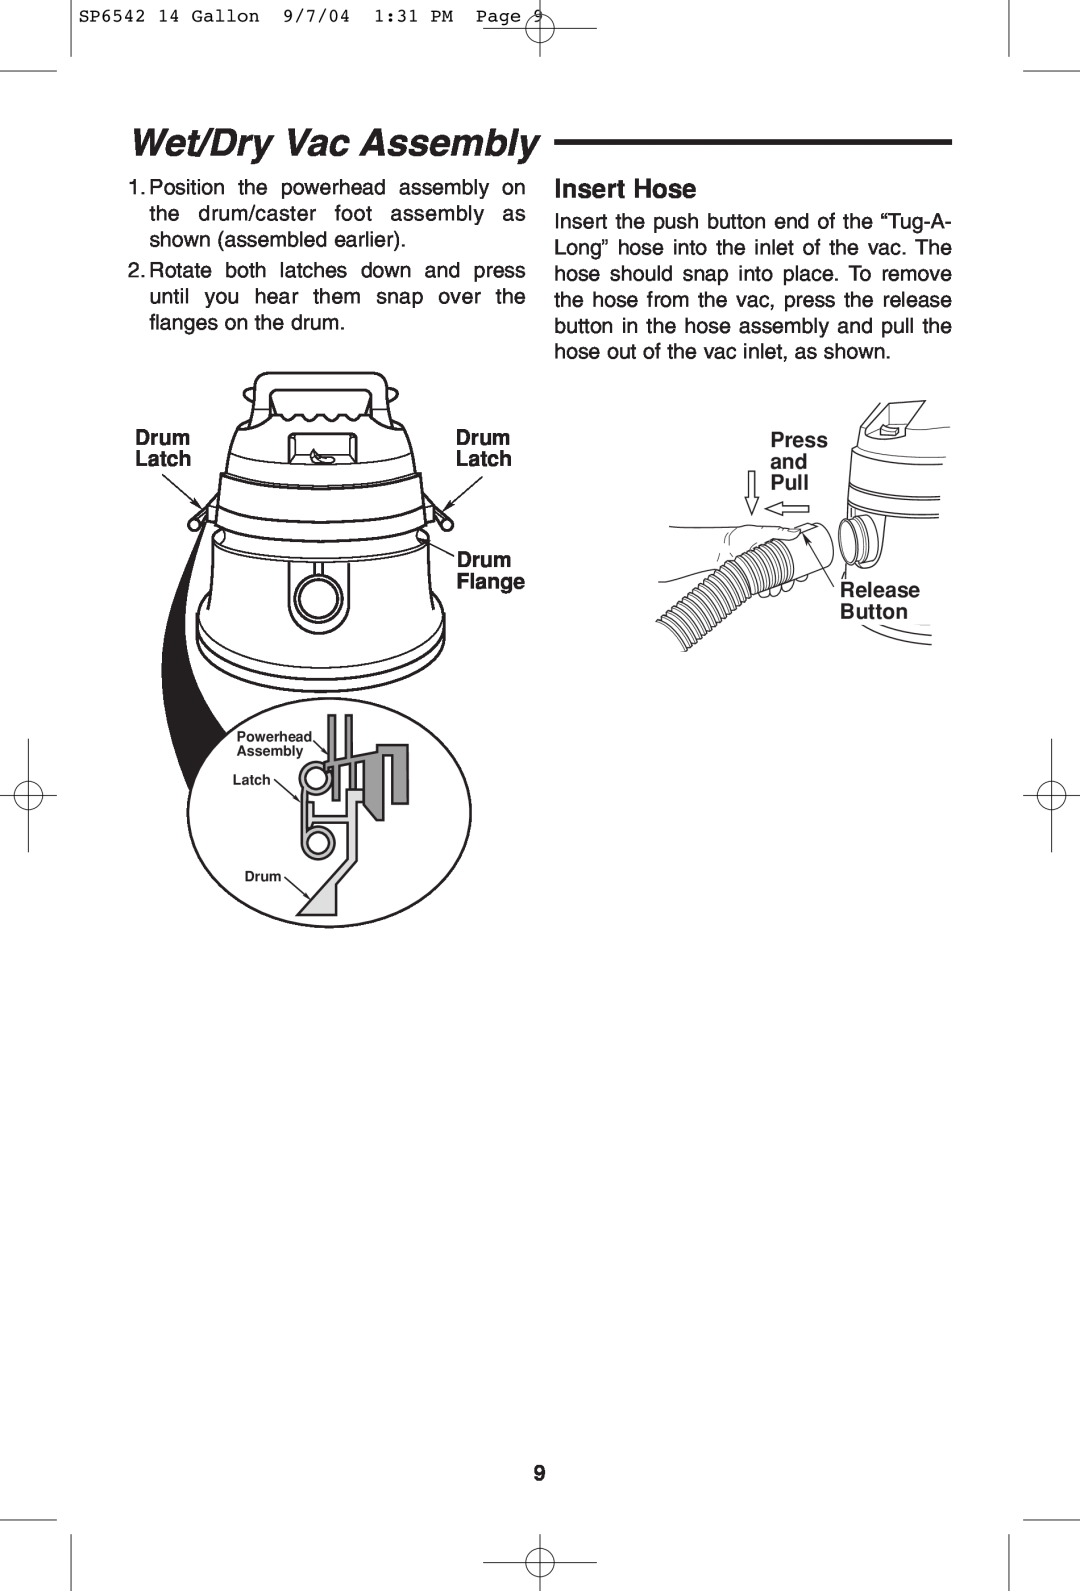 RIDGID WD1450 owner manual Wet/Dry Vac Assembly, Insert Hose 